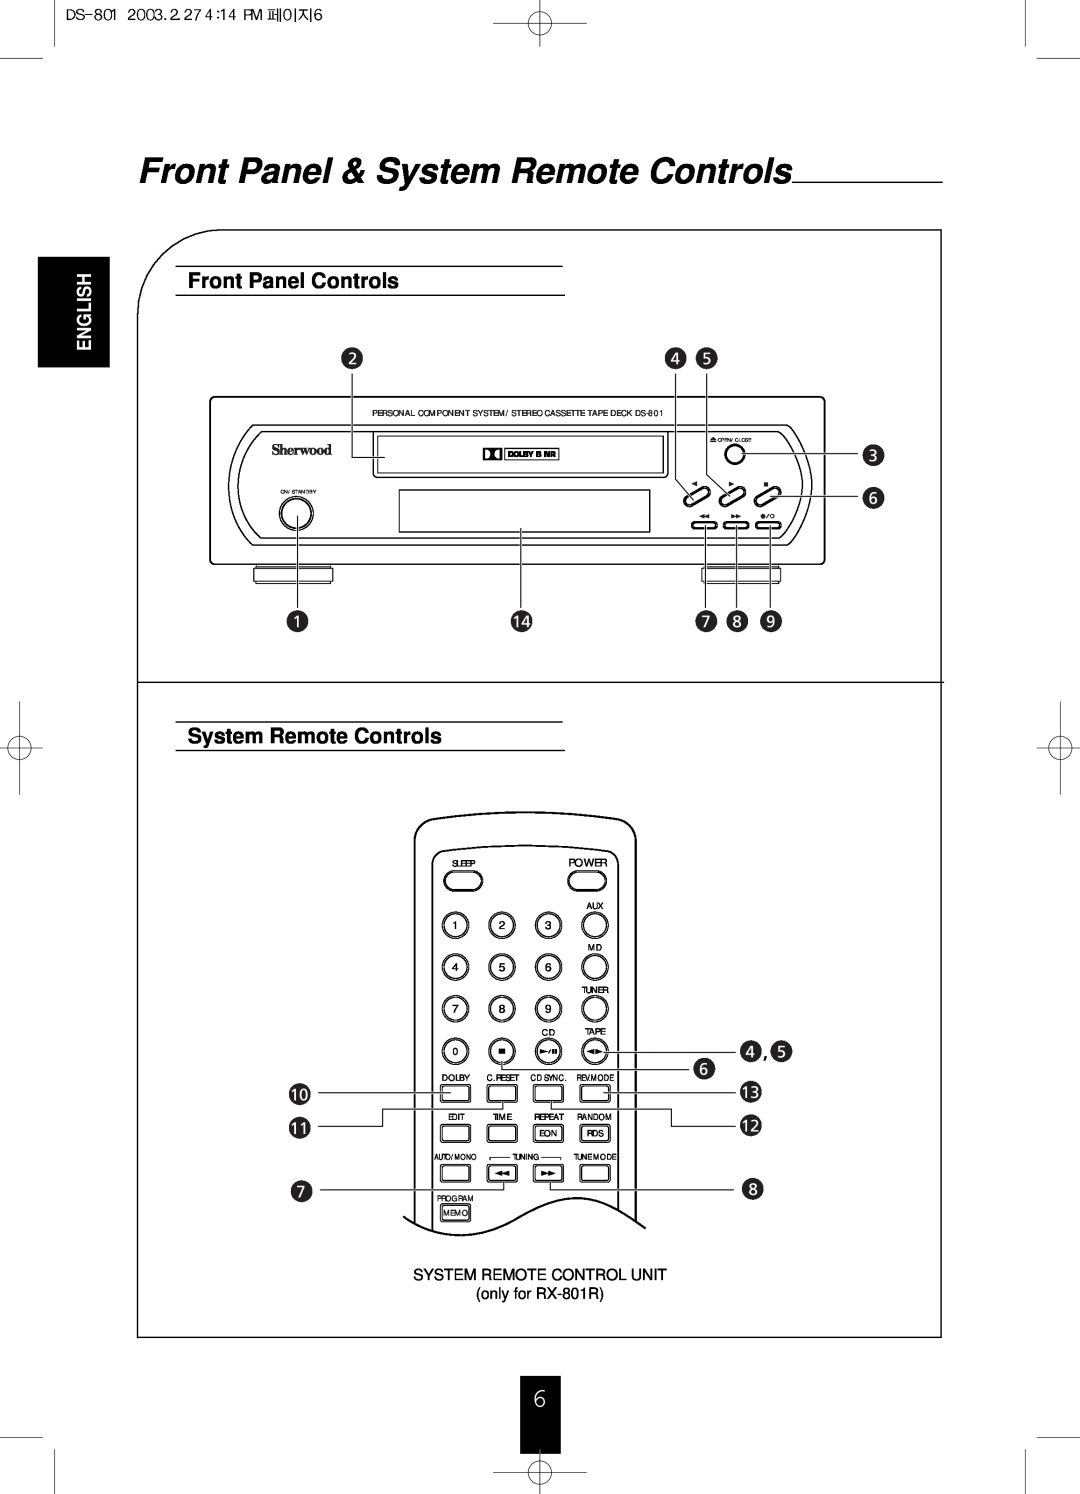 Sherwood DS-801 manual Front Panel & System Remote Controls, Front Panel Controls, English, Sleeppower, Program Memo 